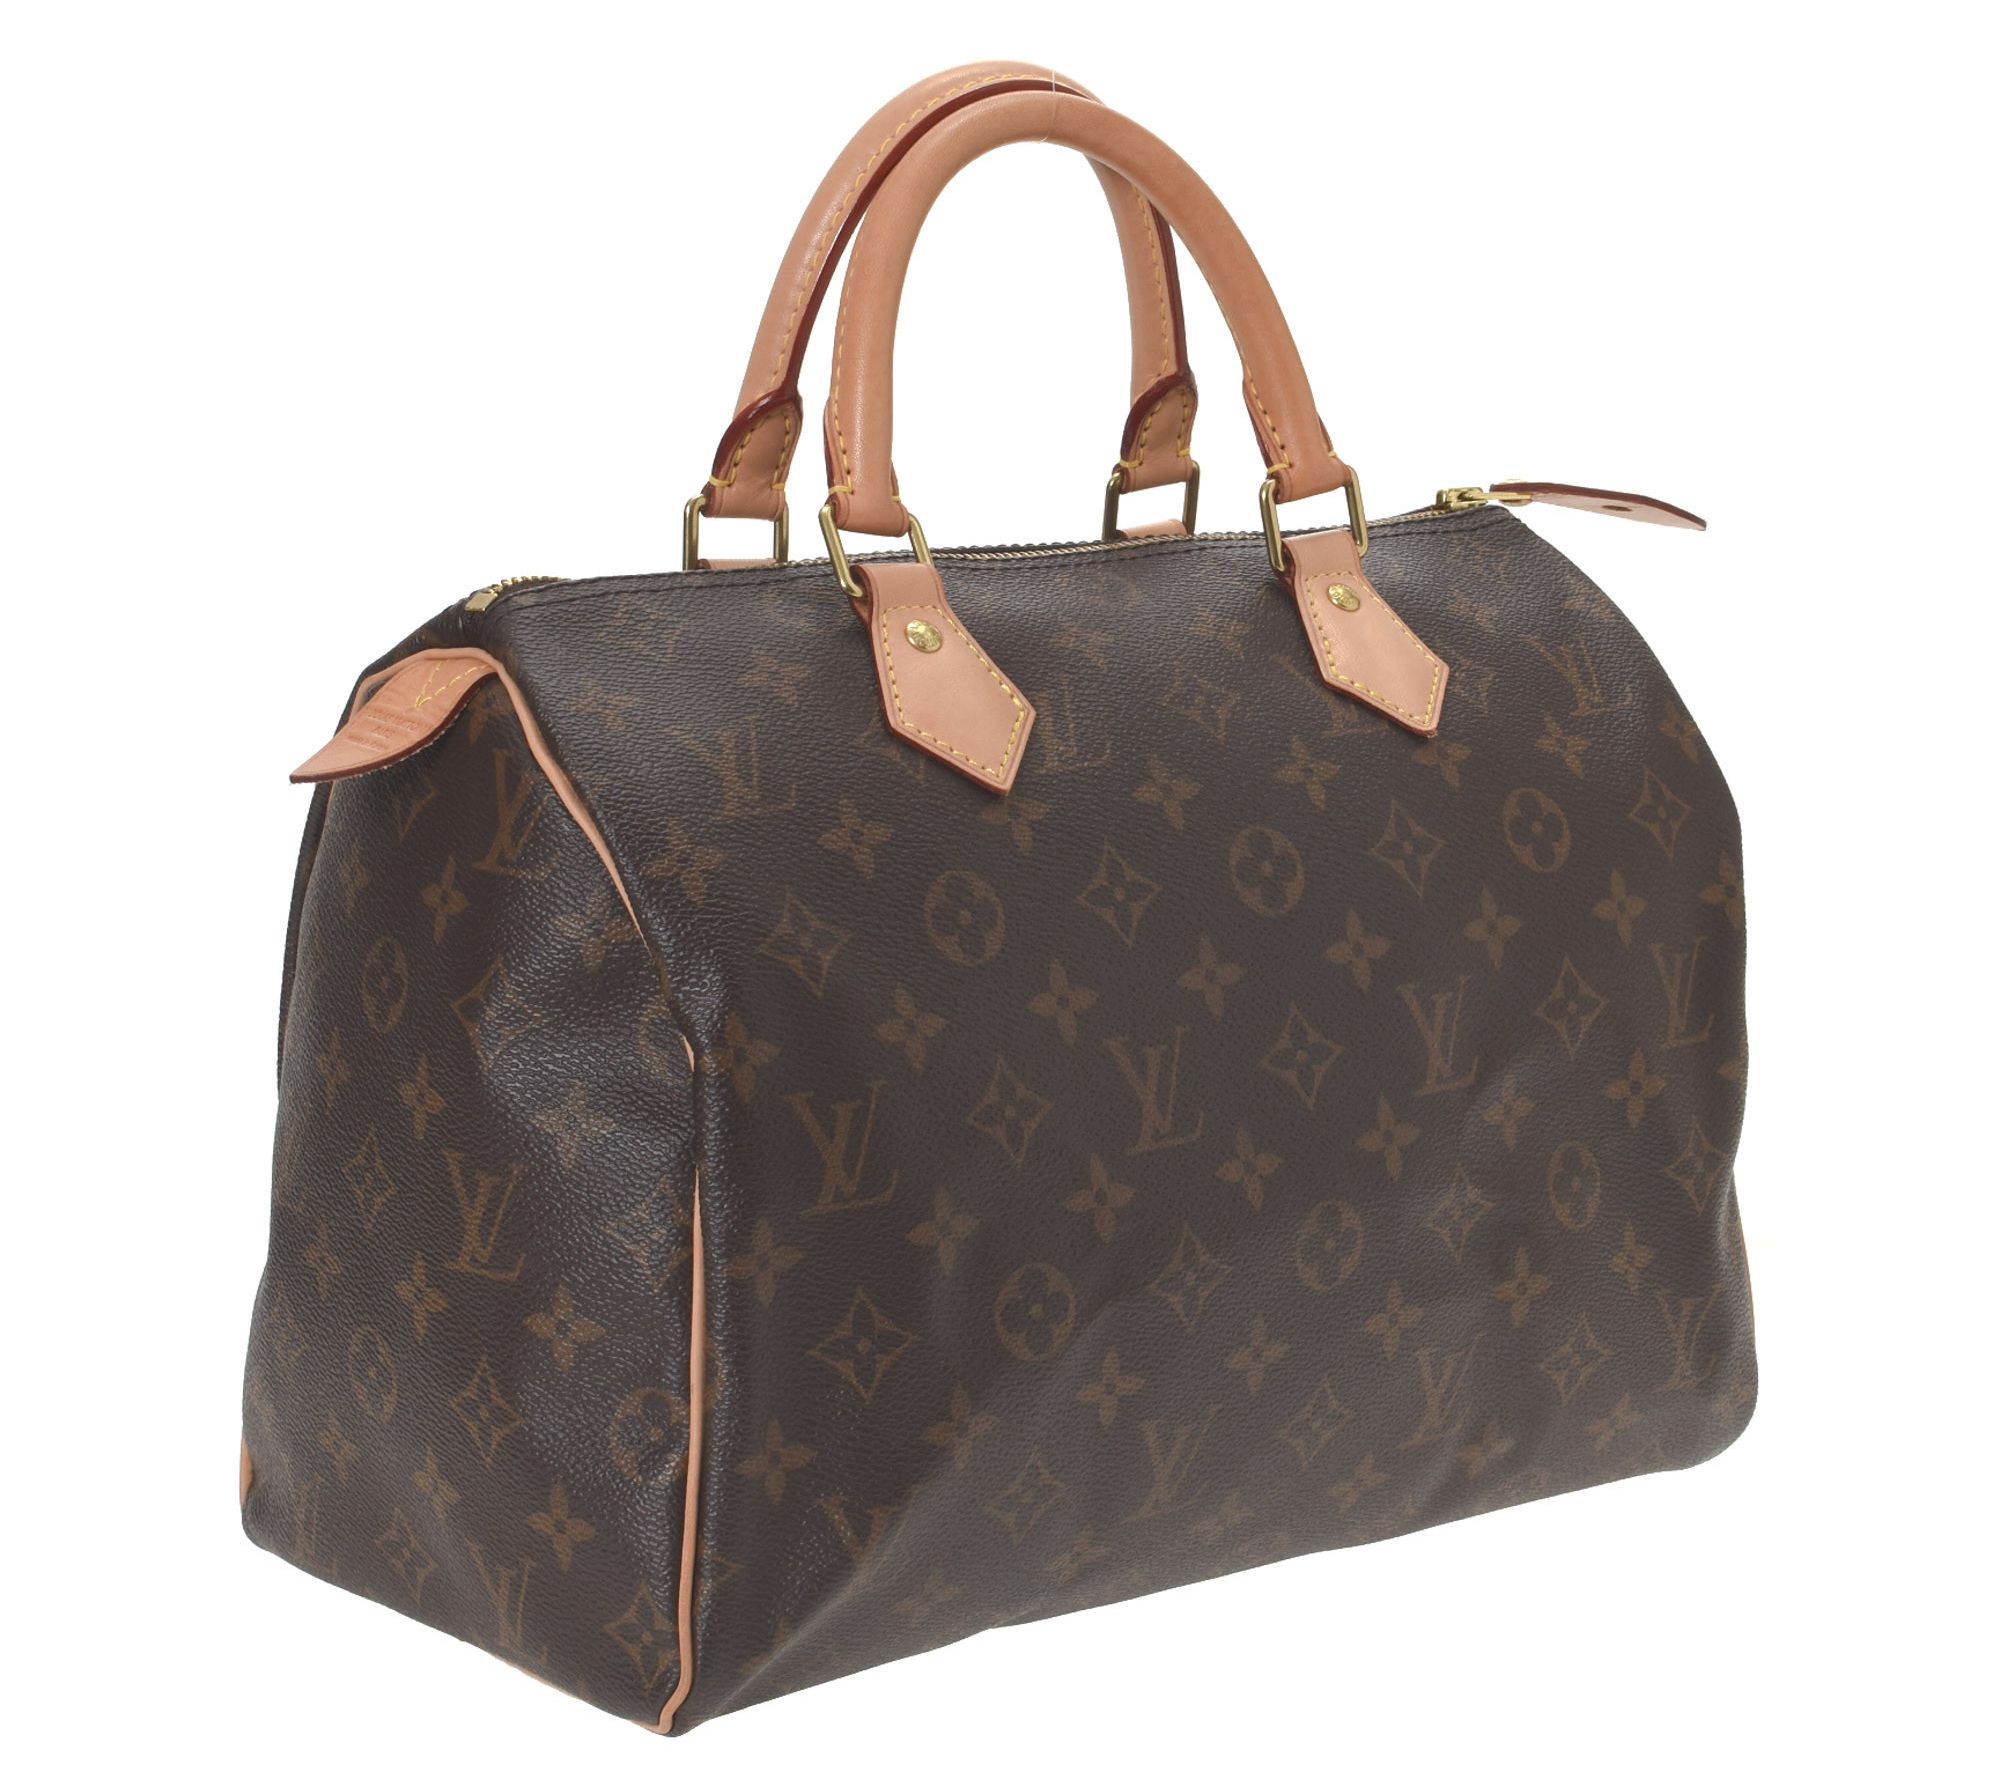 Simple and Classy~Louis vuitton speedy. I love my speedy 30 and